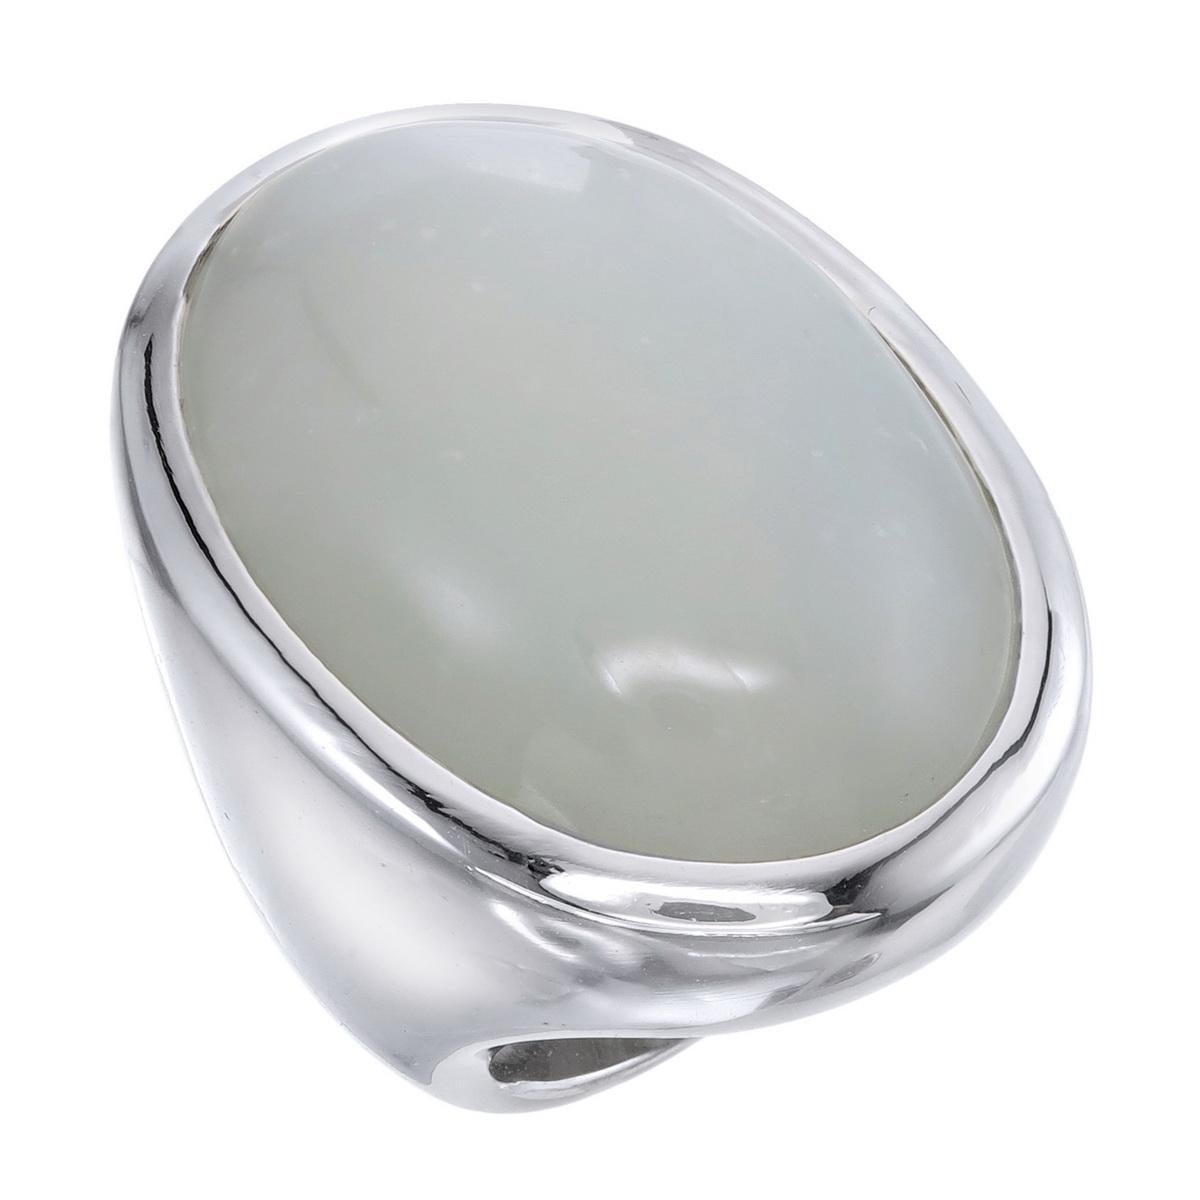 Orloff of Denmark; 83.26 carat Moonstone Sculpture ring fashioned out of 925 Sterling Silver.

Behold an exquisite marvel of nature and craftsmanship; an 83.26 carat moonstone set within a resplendent sterling silver ring. 
This celestial gem,